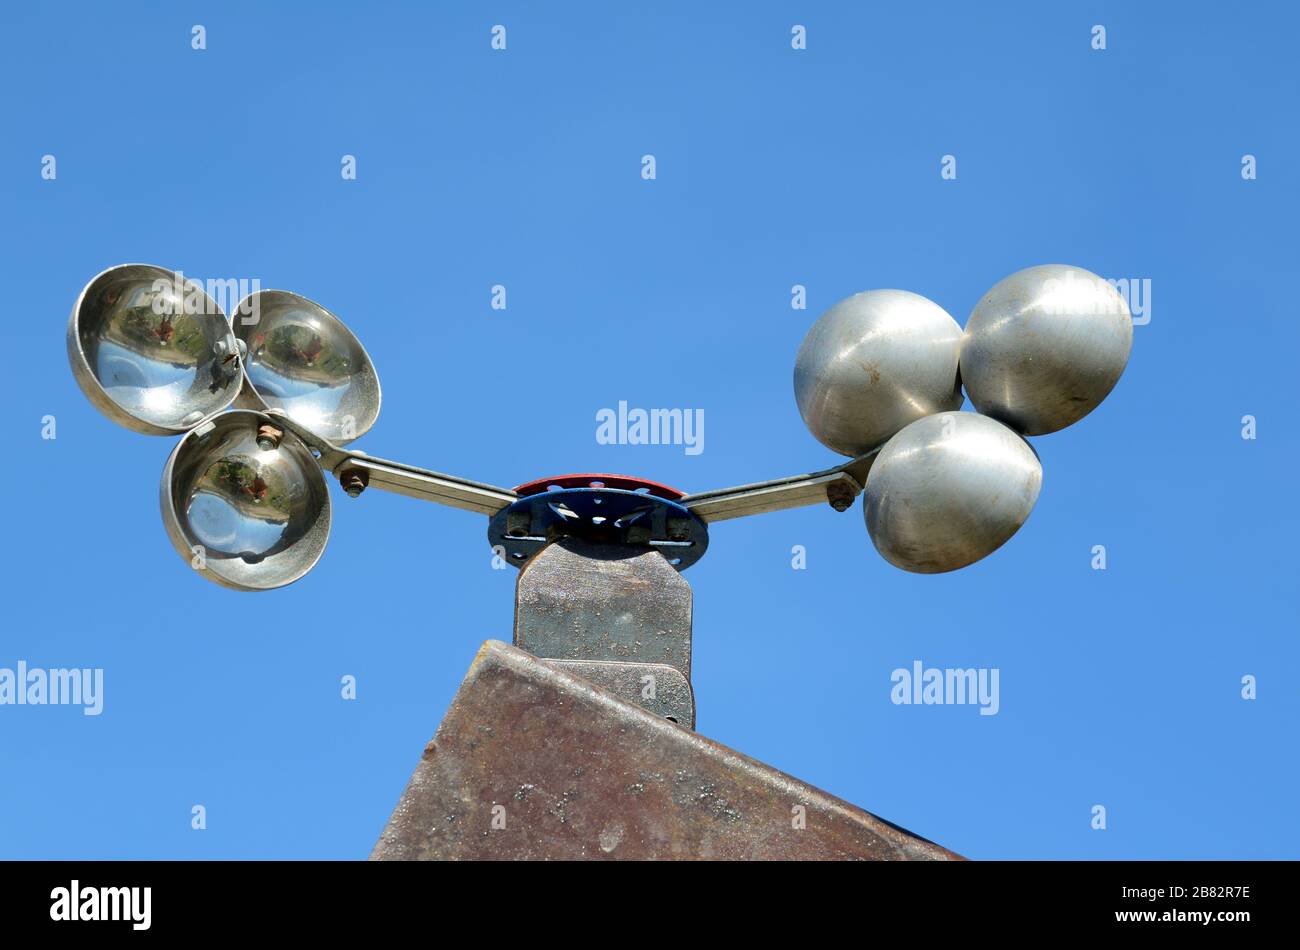 https://c8.alamy.com/comp/2B82R7E/hemispherical-cup-anemometer-a-wind-speed-instrument-used-for-measuring-wind-speed-direction-2B82R7E.jpg